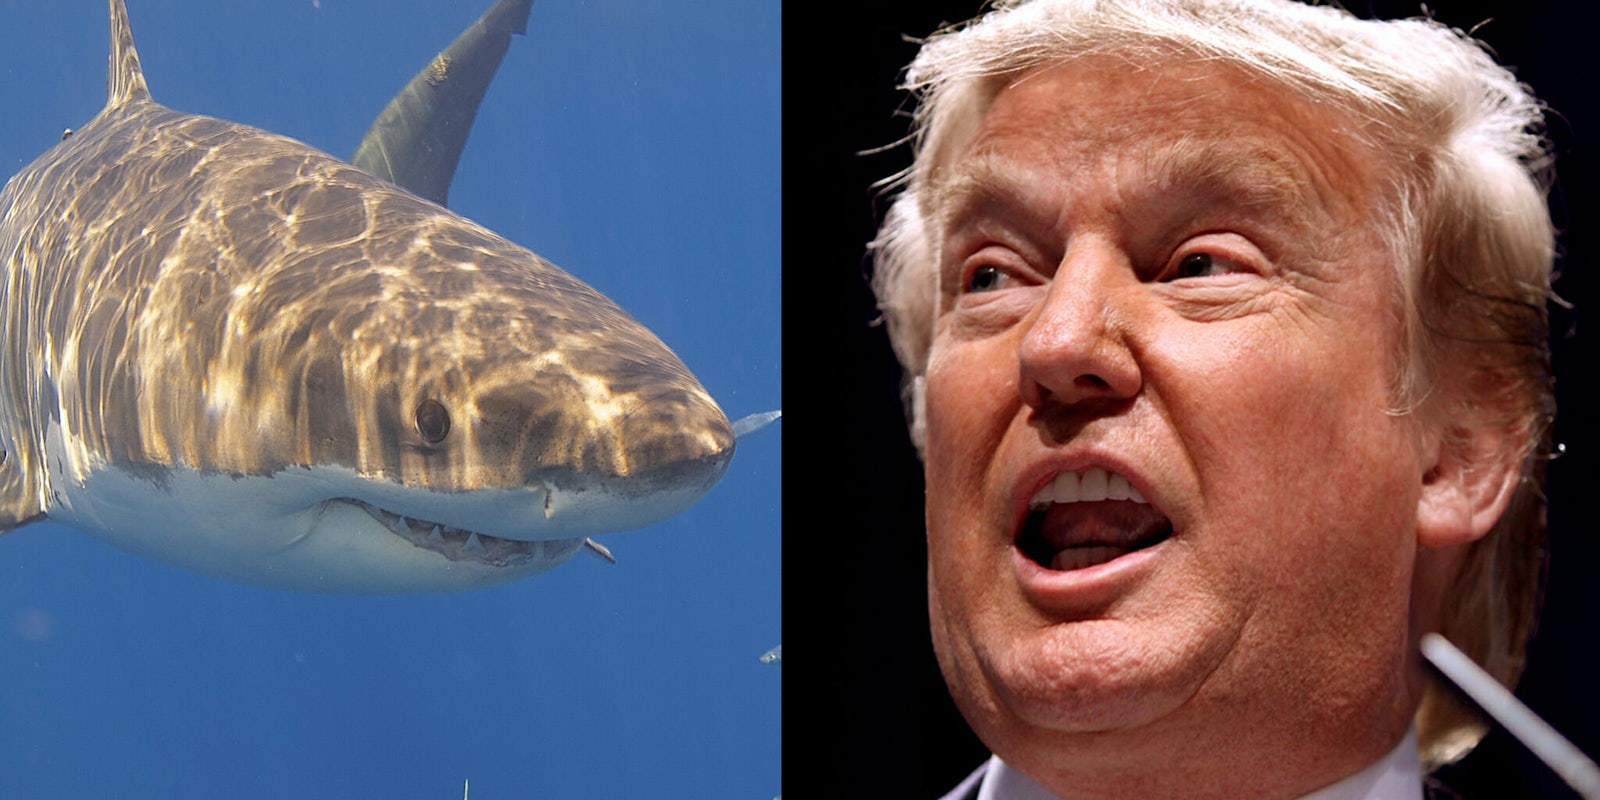 President Donald Trump may hope that 'all sharks die,' but it appears that many people don't have the same death wish for the ocean predators.